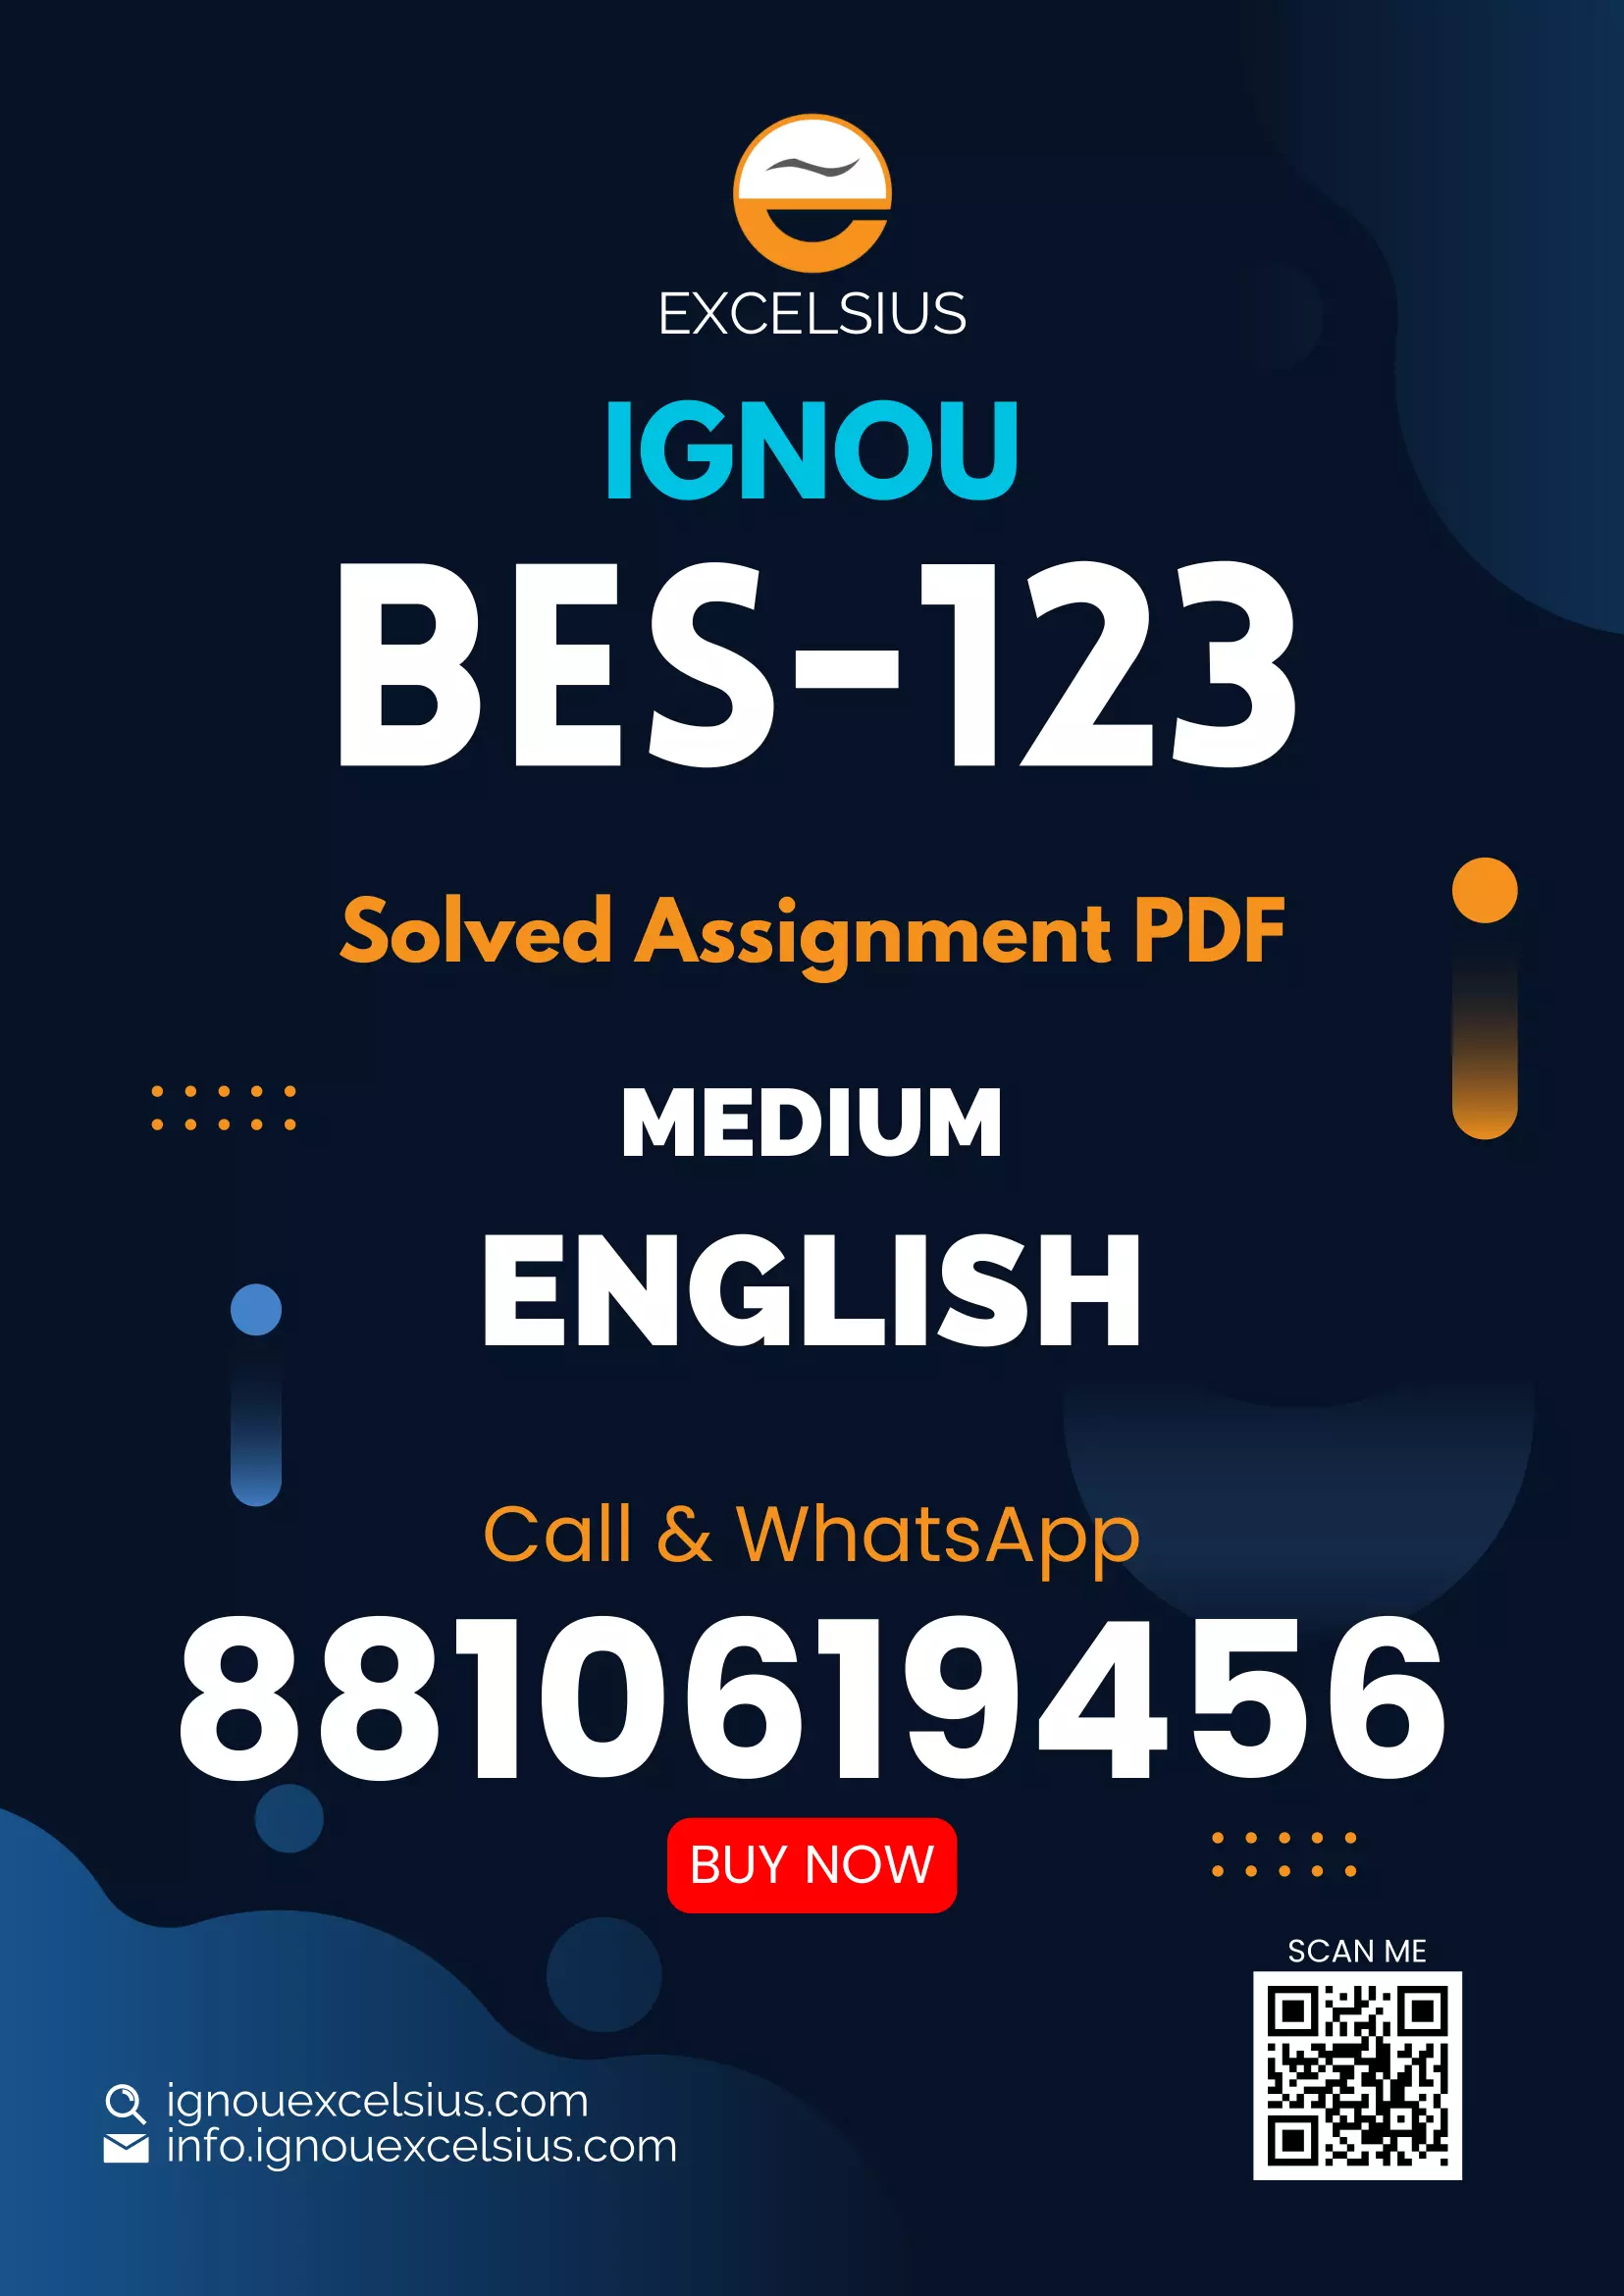 IGNOU BES-123 - Learning and Teaching, Latest Solved Assignment-January 2022